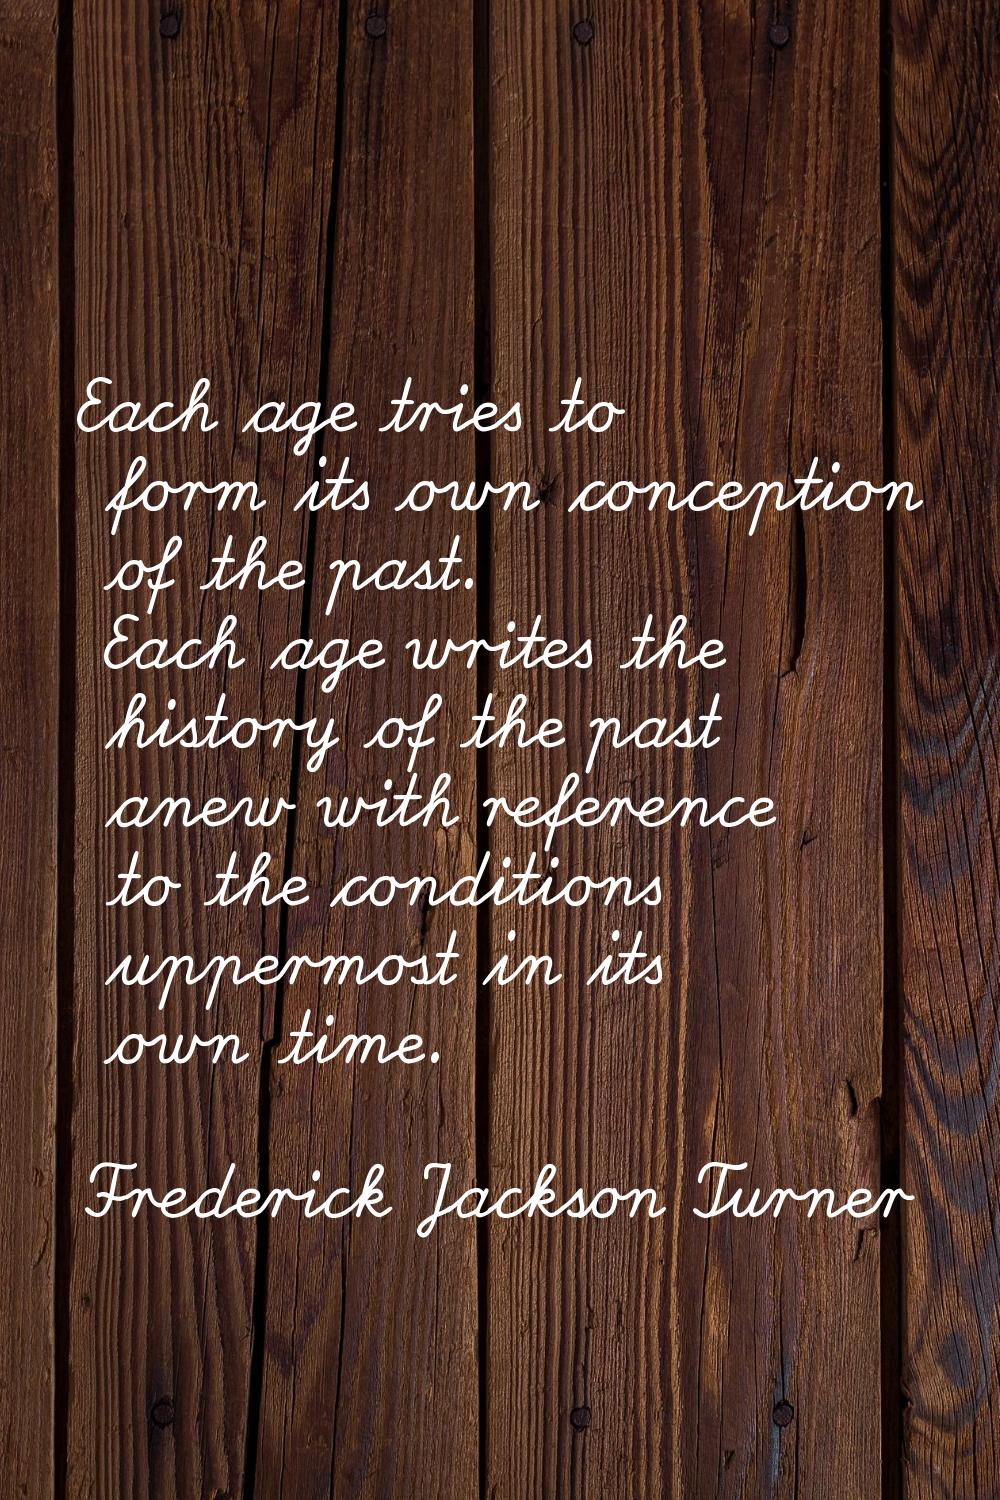 Each age tries to form its own conception of the past. Each age writes the history of the past anew